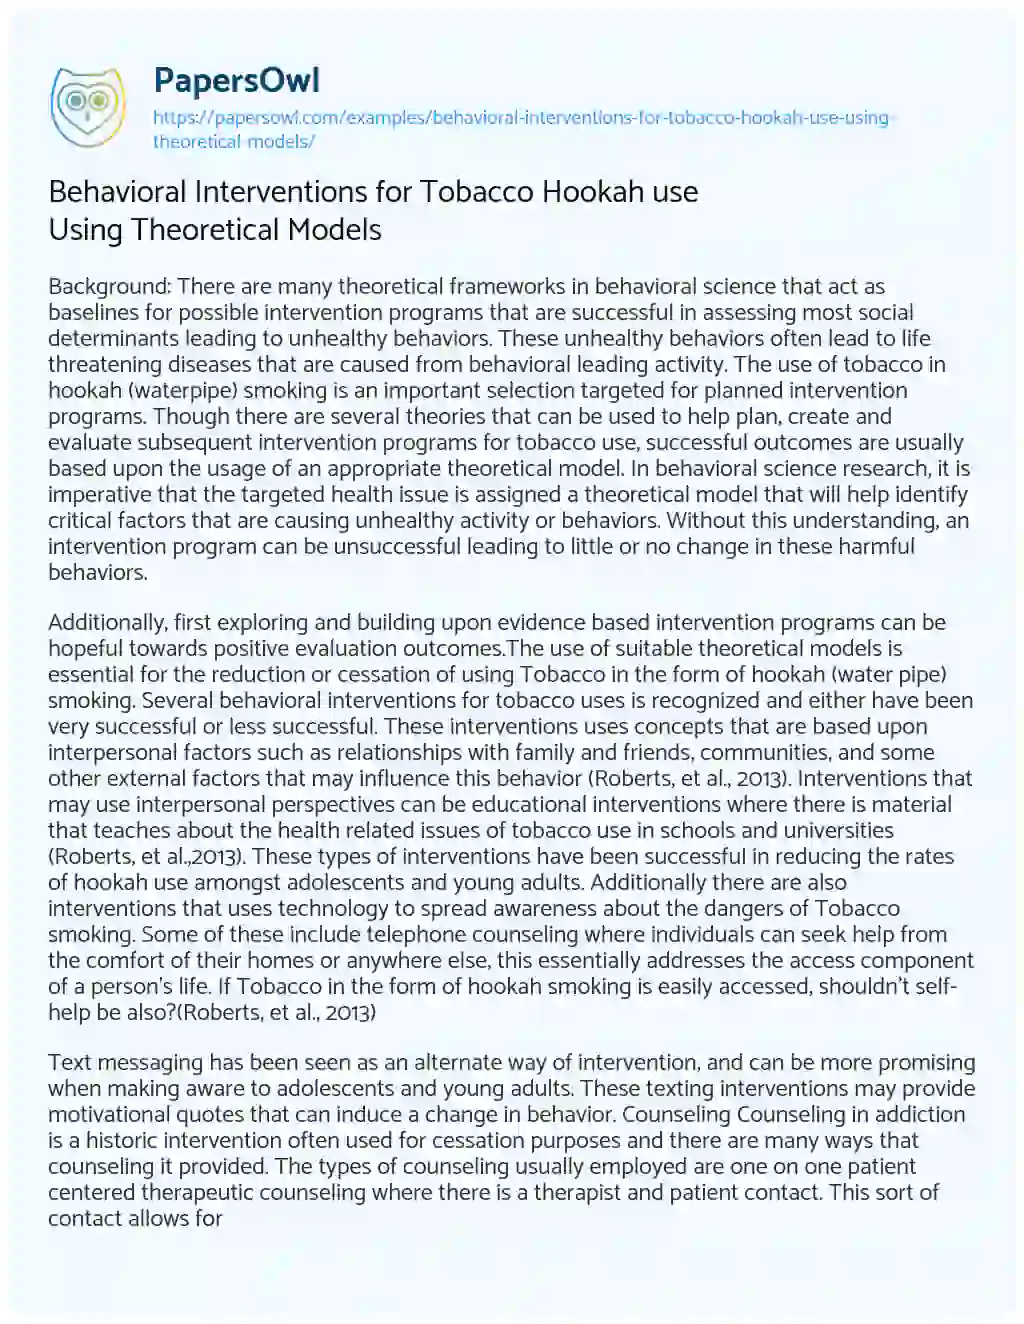 Behavioral Interventions for Tobacco Hookah Use Using Theoretical Models essay